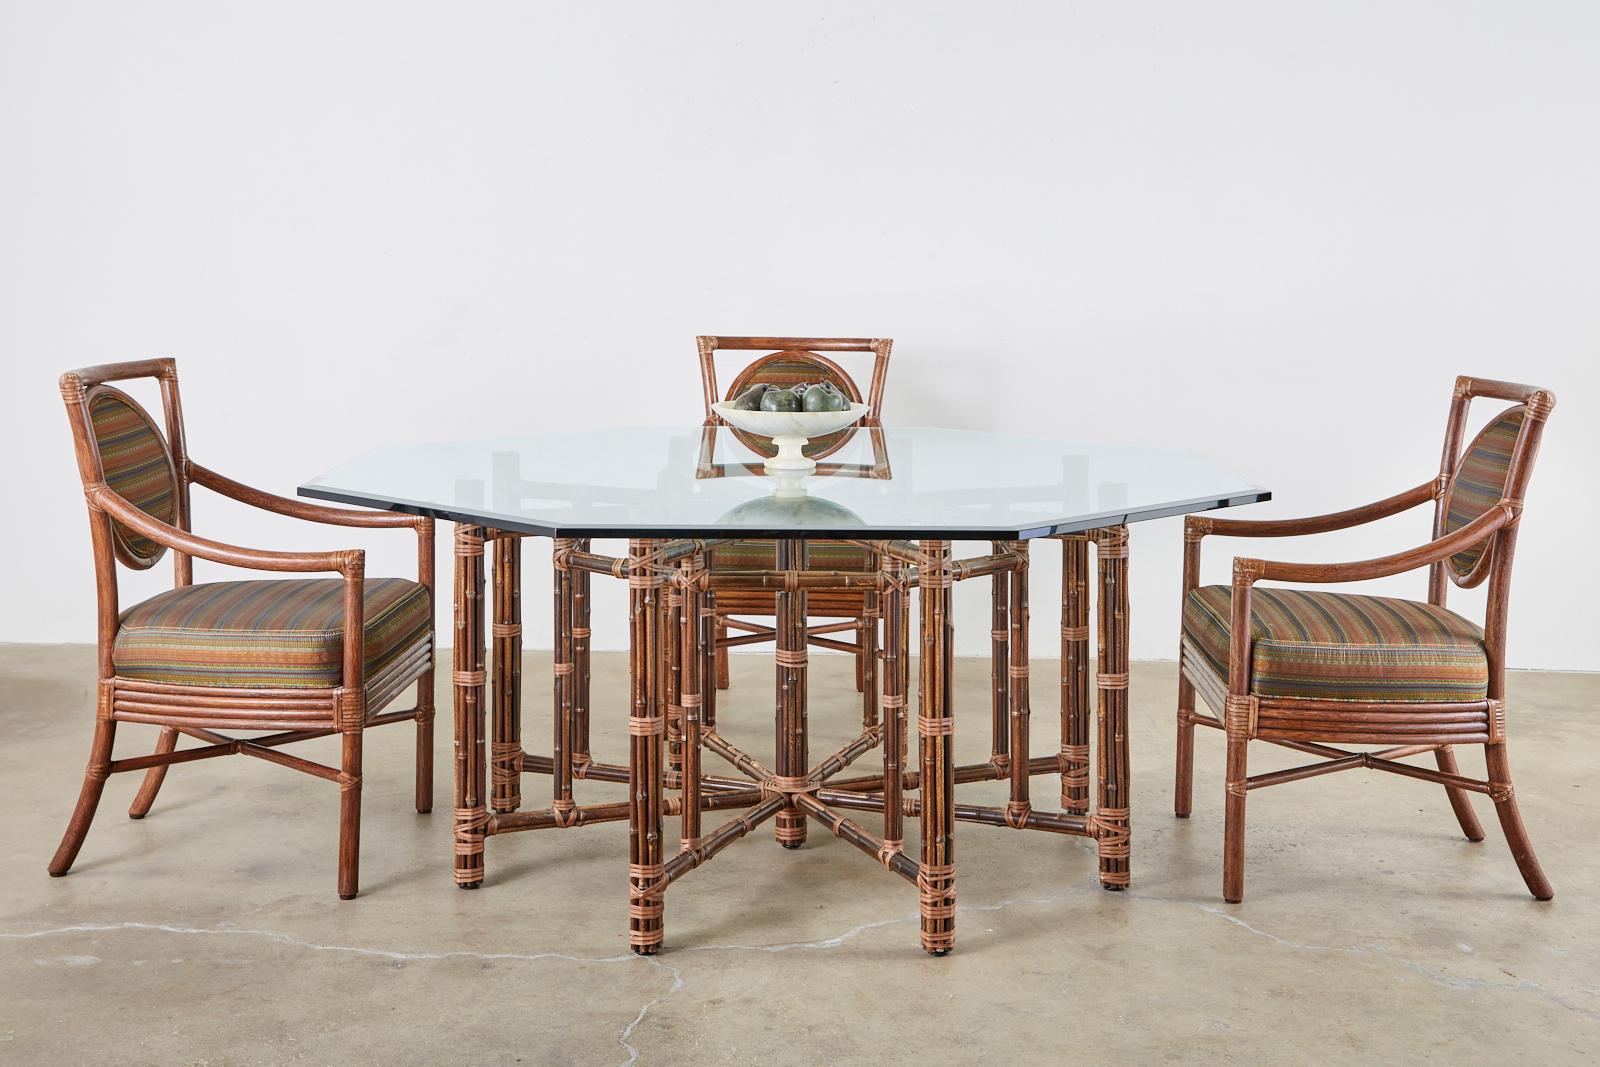 Elegant set of eight bamboo rattan organic modern dining chairs by Orlando Diaz-Azcuy for McGuire furniture. Known as the Salon armchair constructed from rattan poles lashed together with leather rawhide laces on the exposed joints. The square